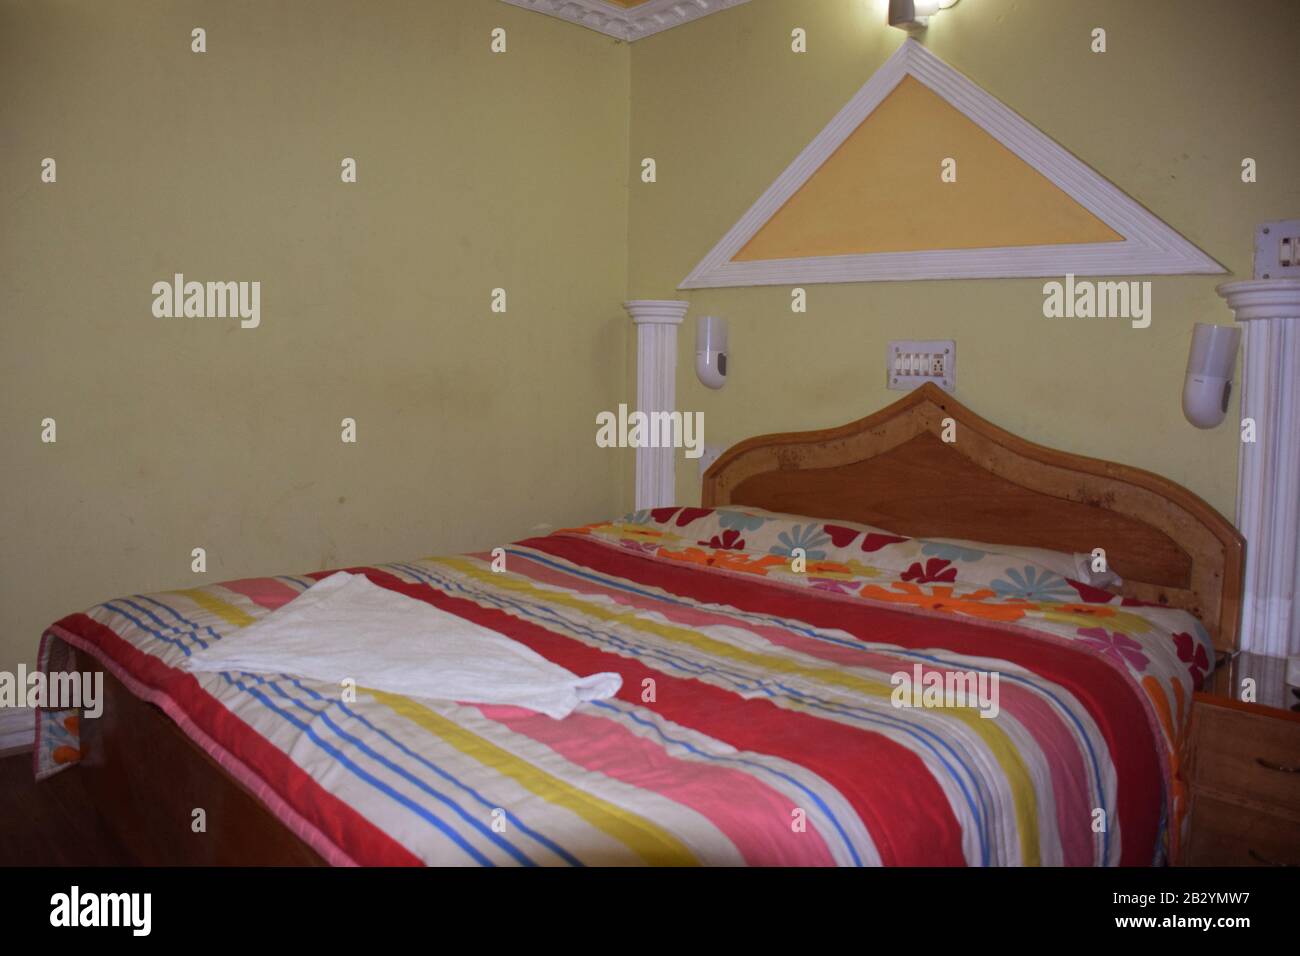 A standard budget hotel room in india Stock Photo